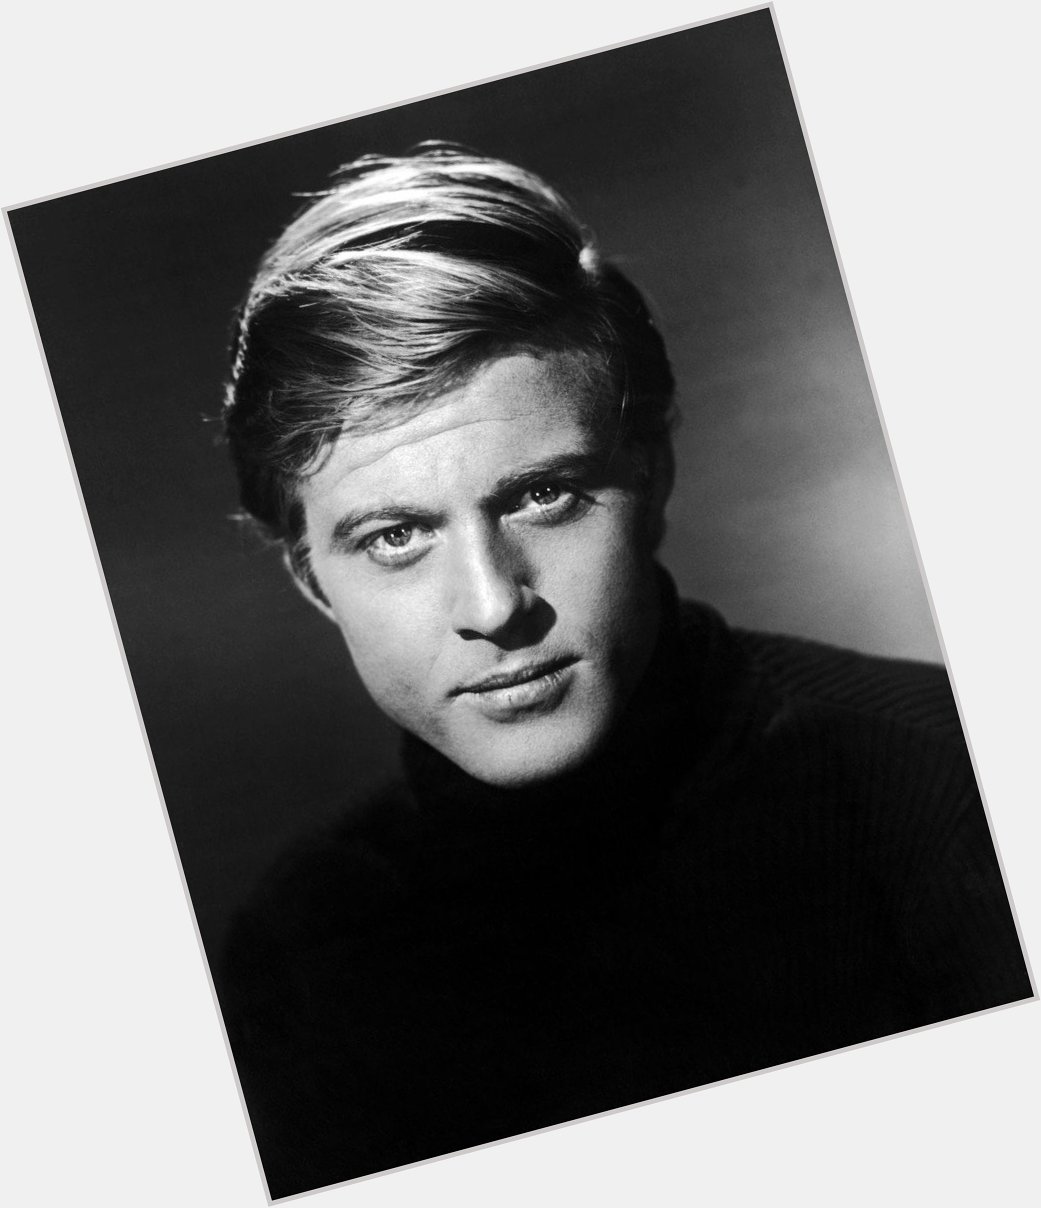 Happy 81st Birthday to the legendary actor, director and producer Robert Redford! (August 18, 1936) 